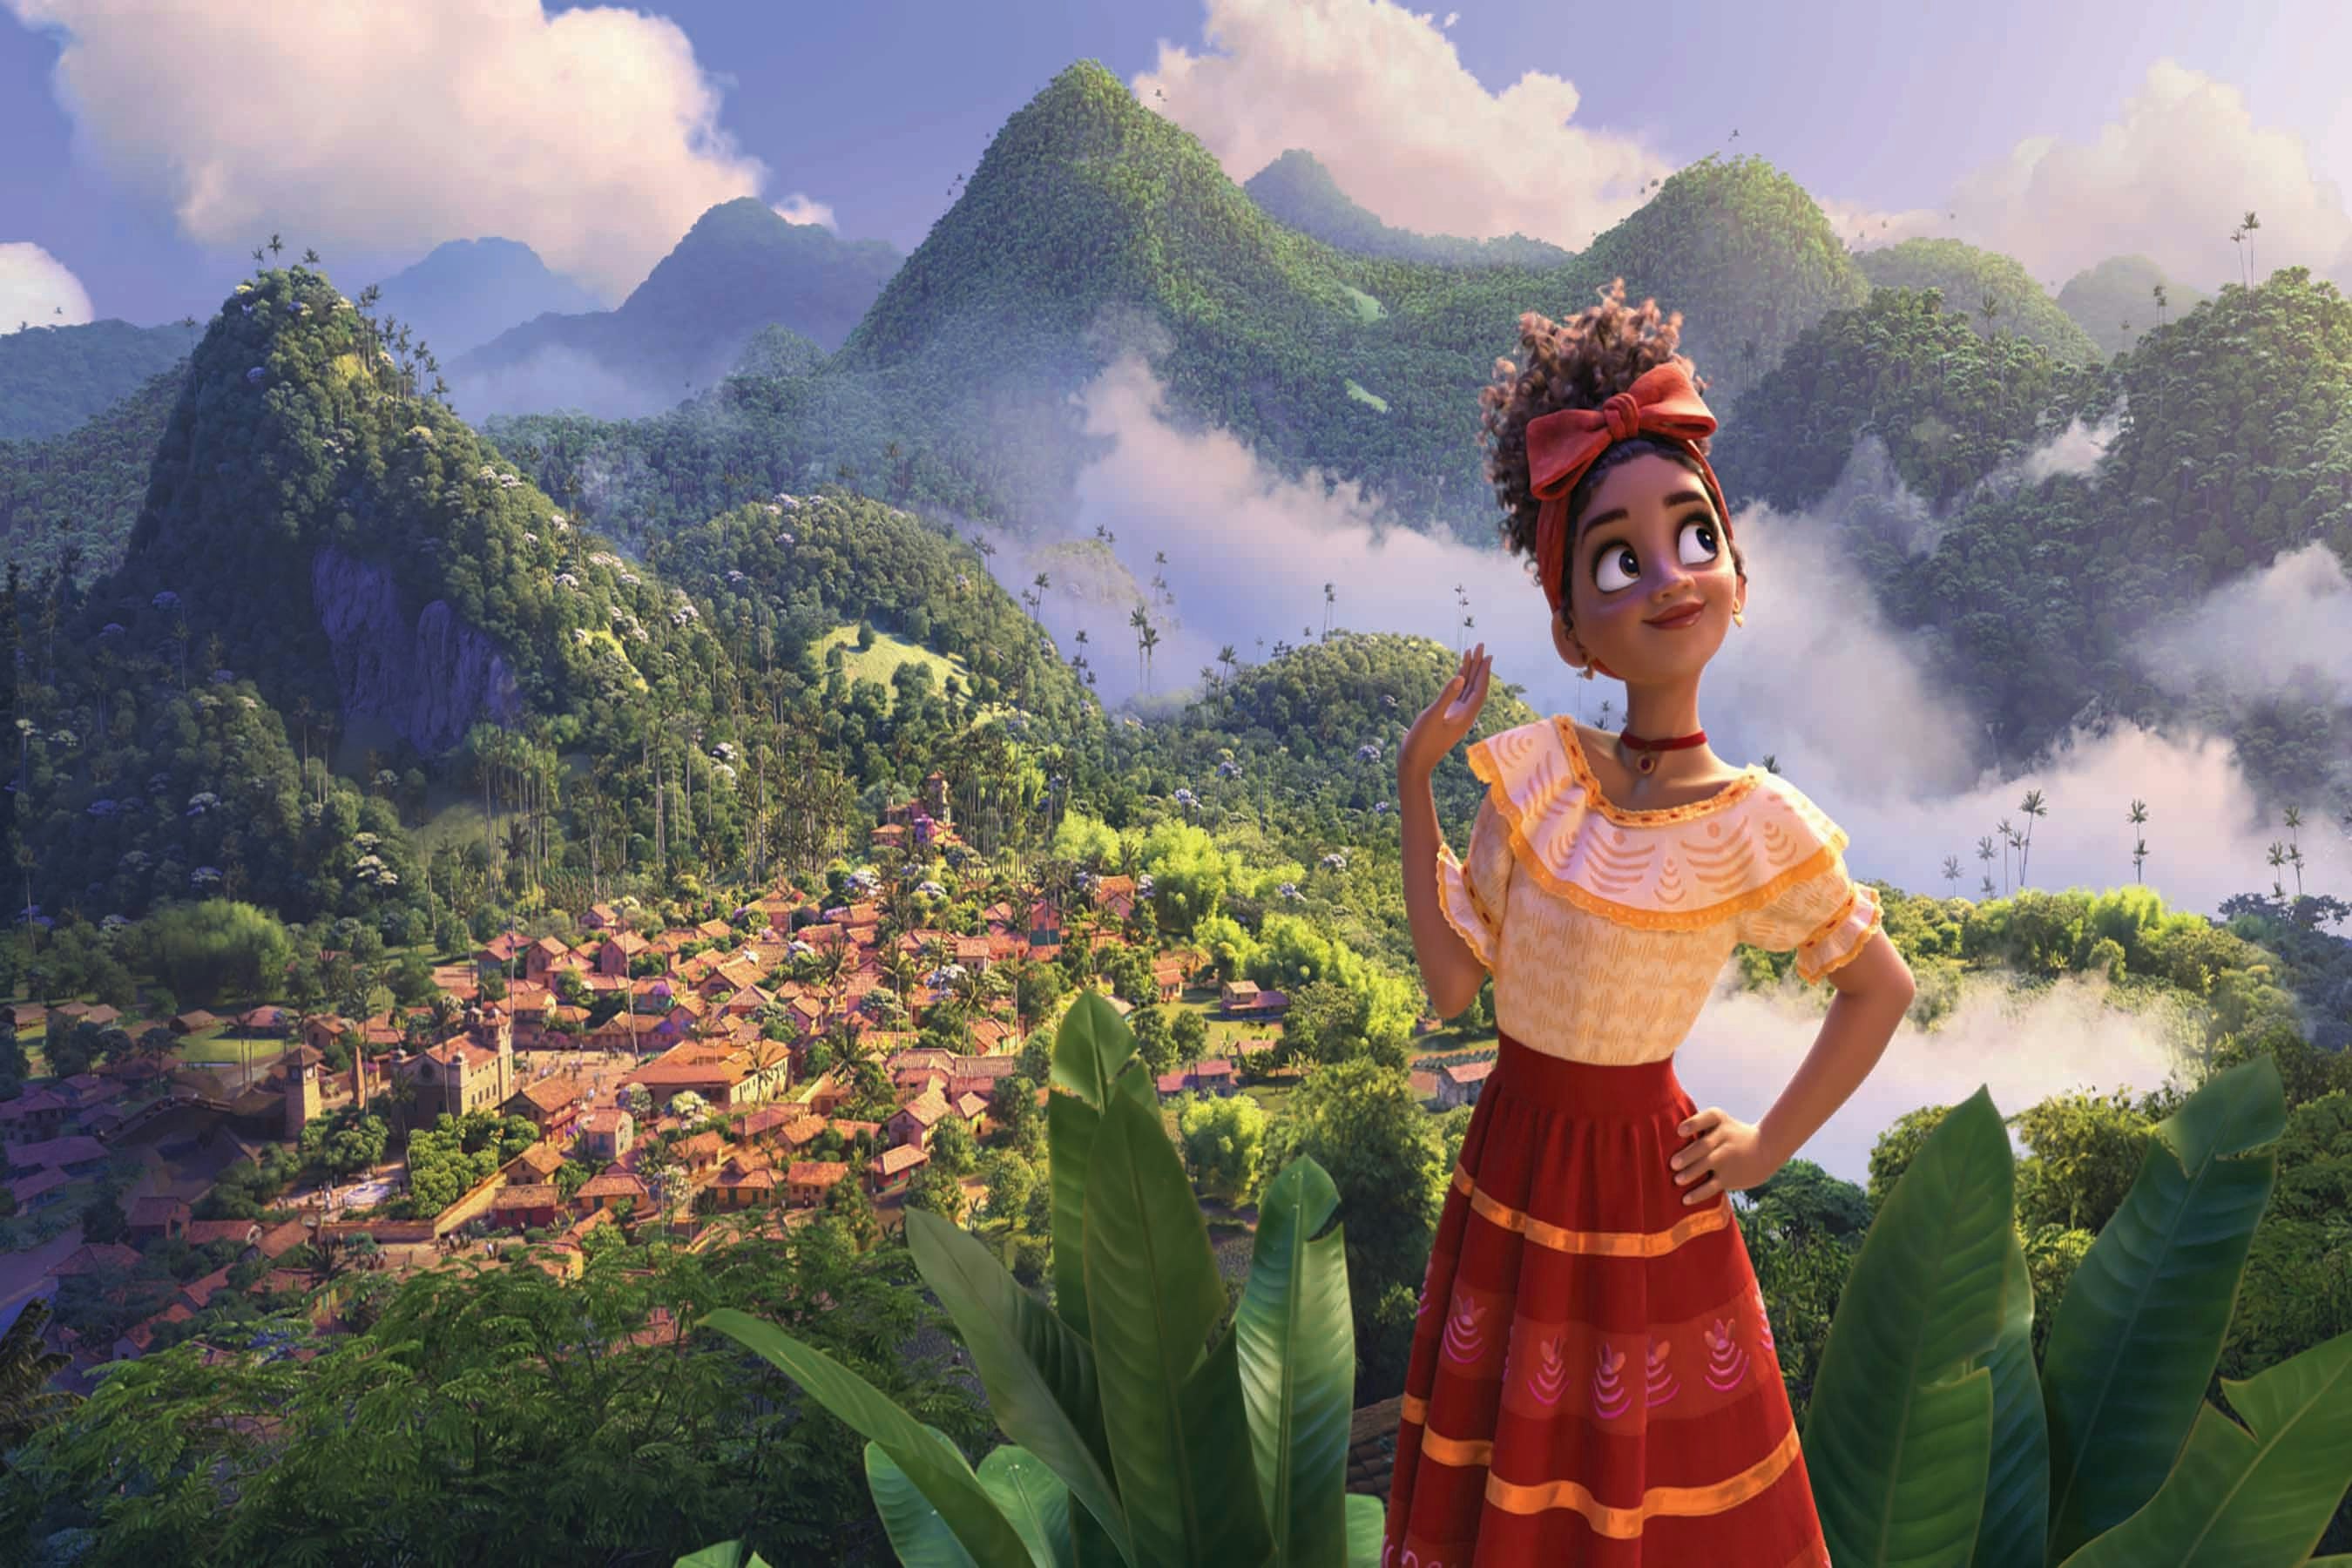 Disney's 'Encanto' is a new animated journey to Colombia